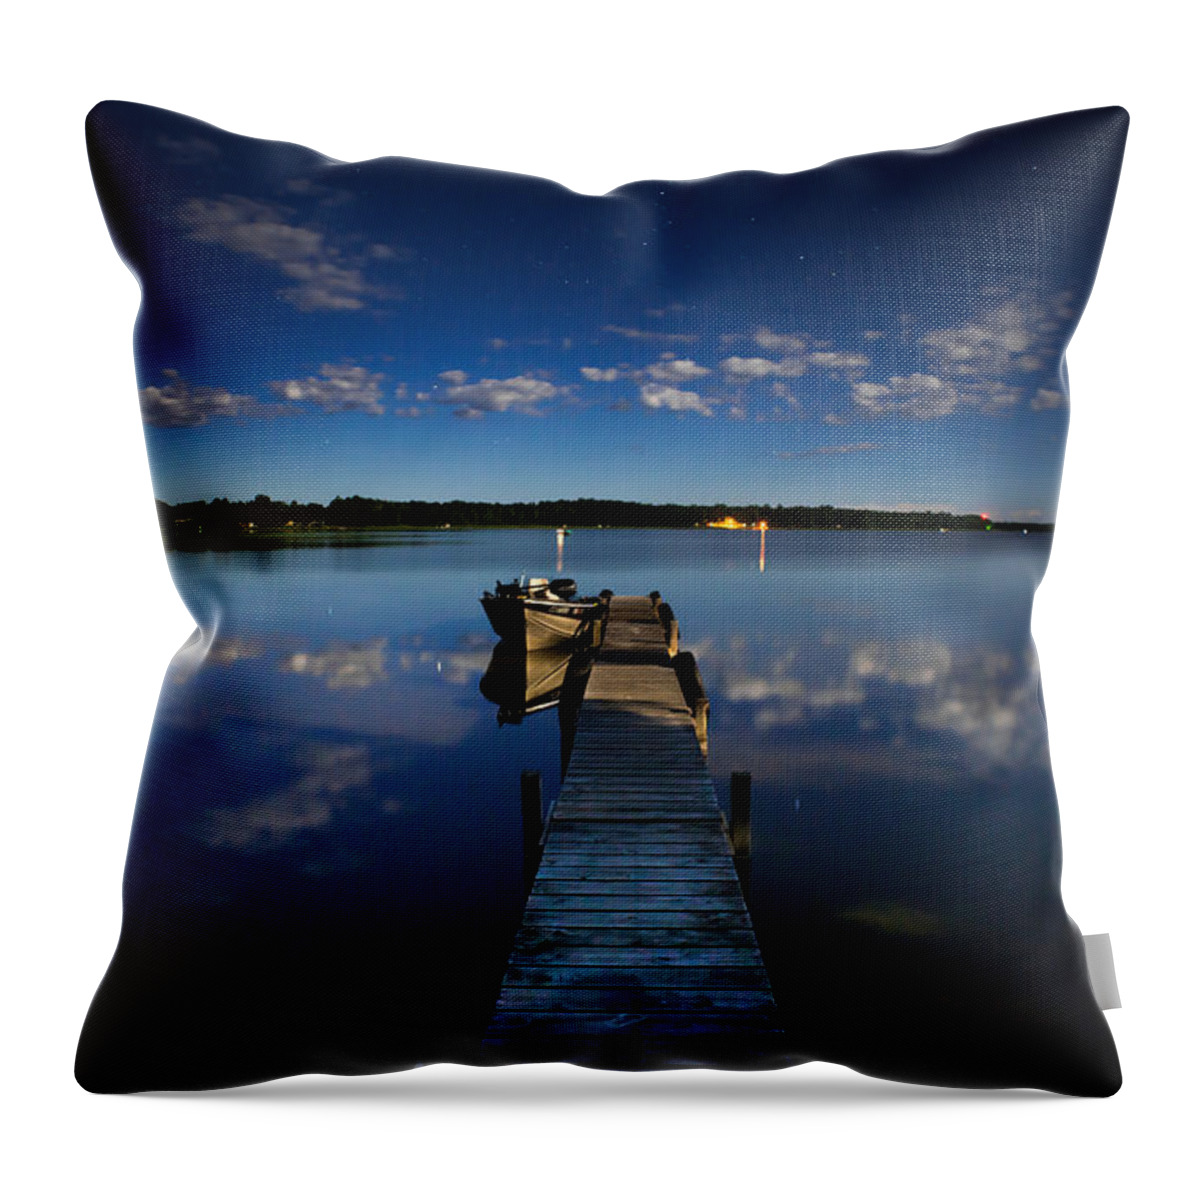 Blondeau Throw Pillow featuring the photograph Midnight at Shady Shore on Moose Lake Minnesota by Alex Blondeau